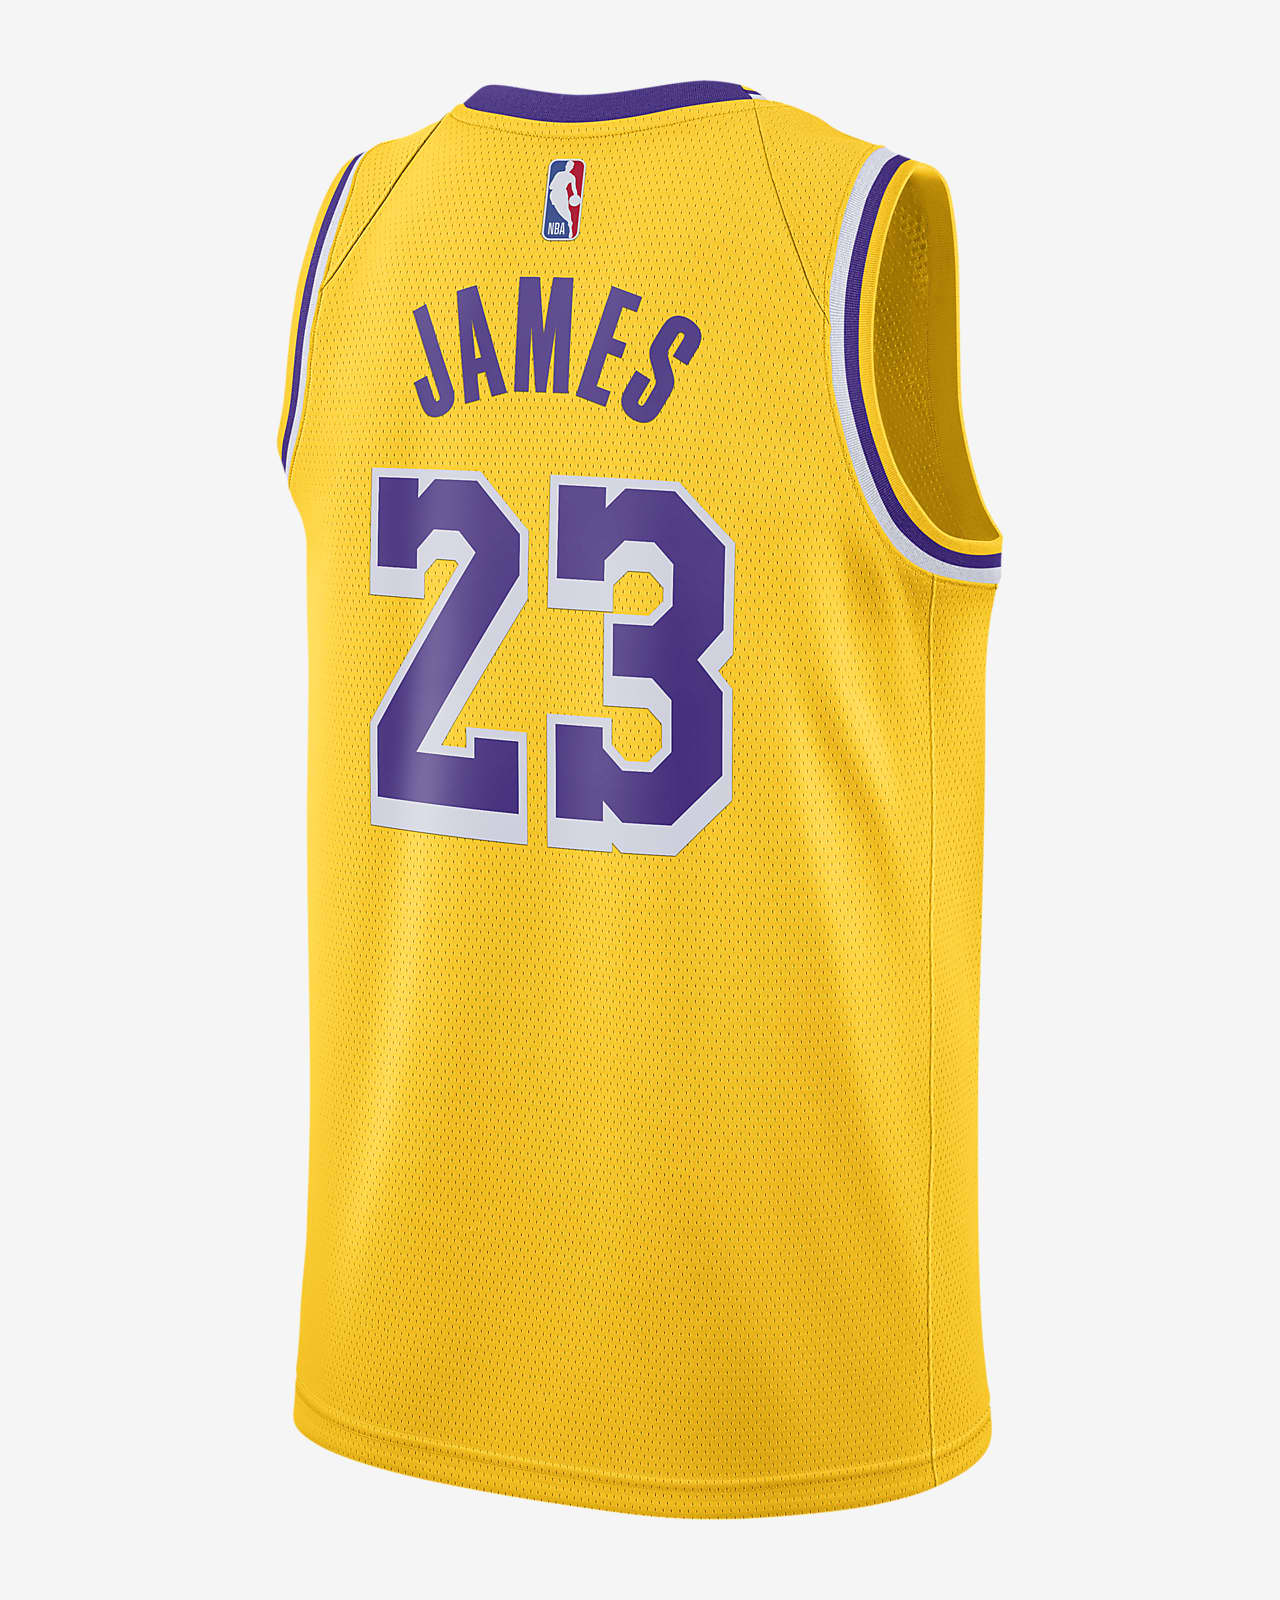 signed lebron lakers jersey